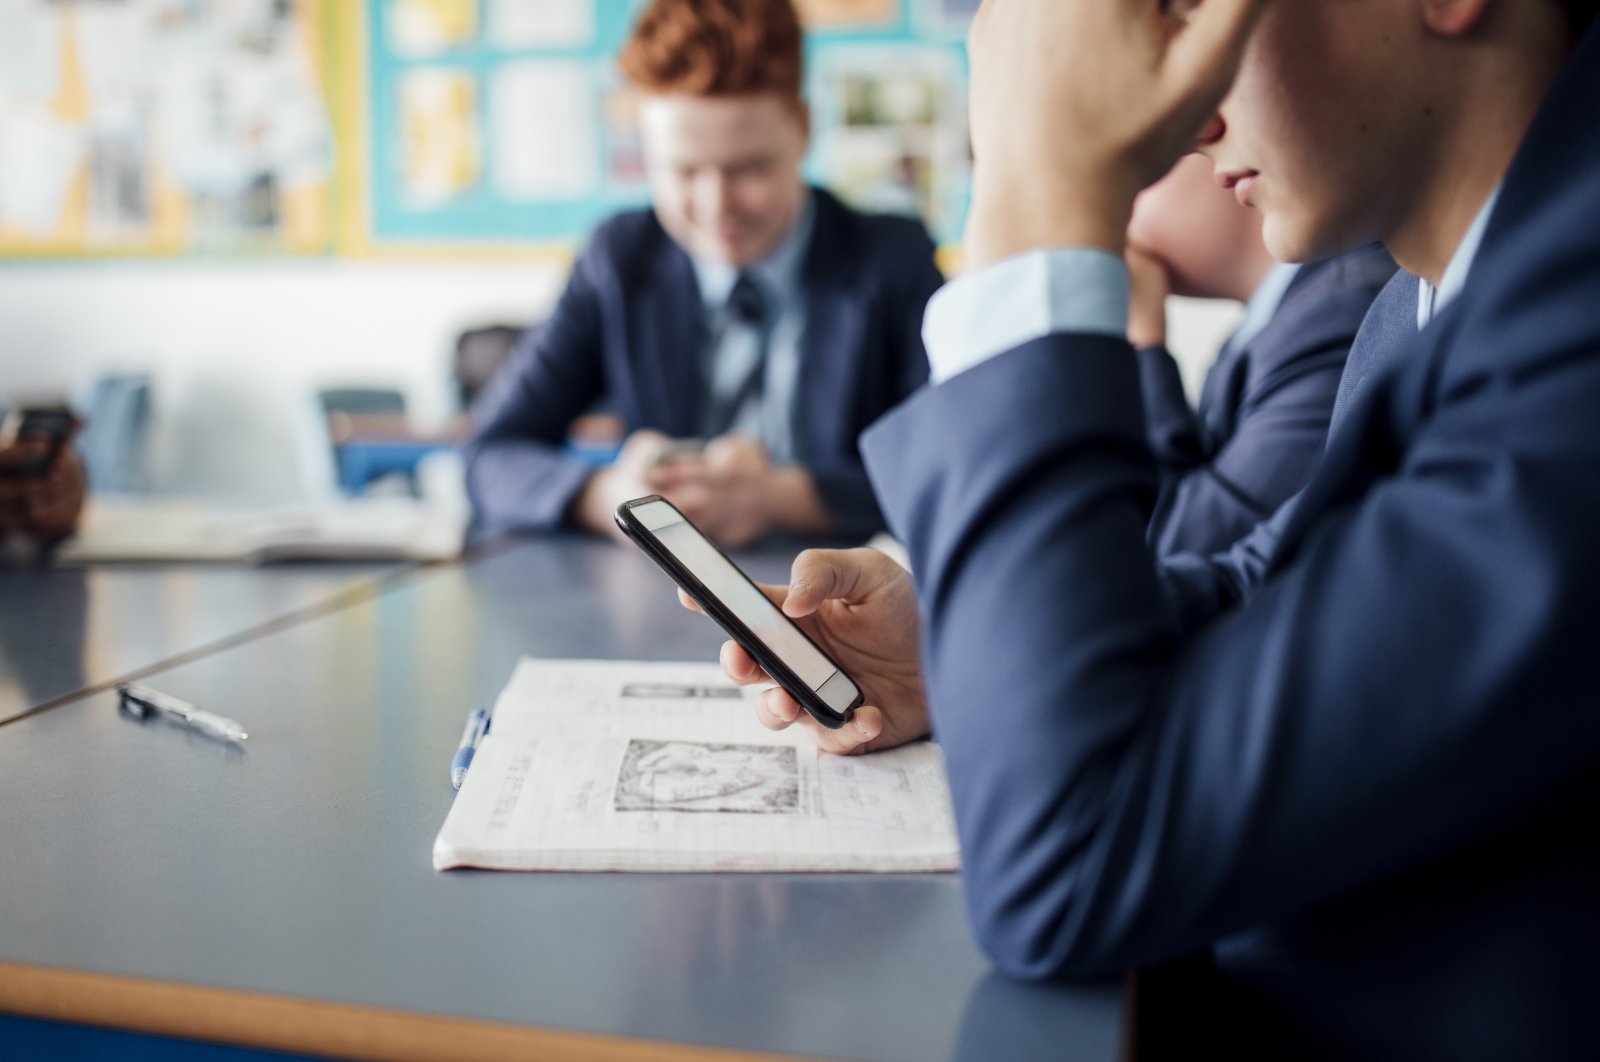 The new guidance would require schools to take action for violations of the ban on smartphones during lessons and breaks.